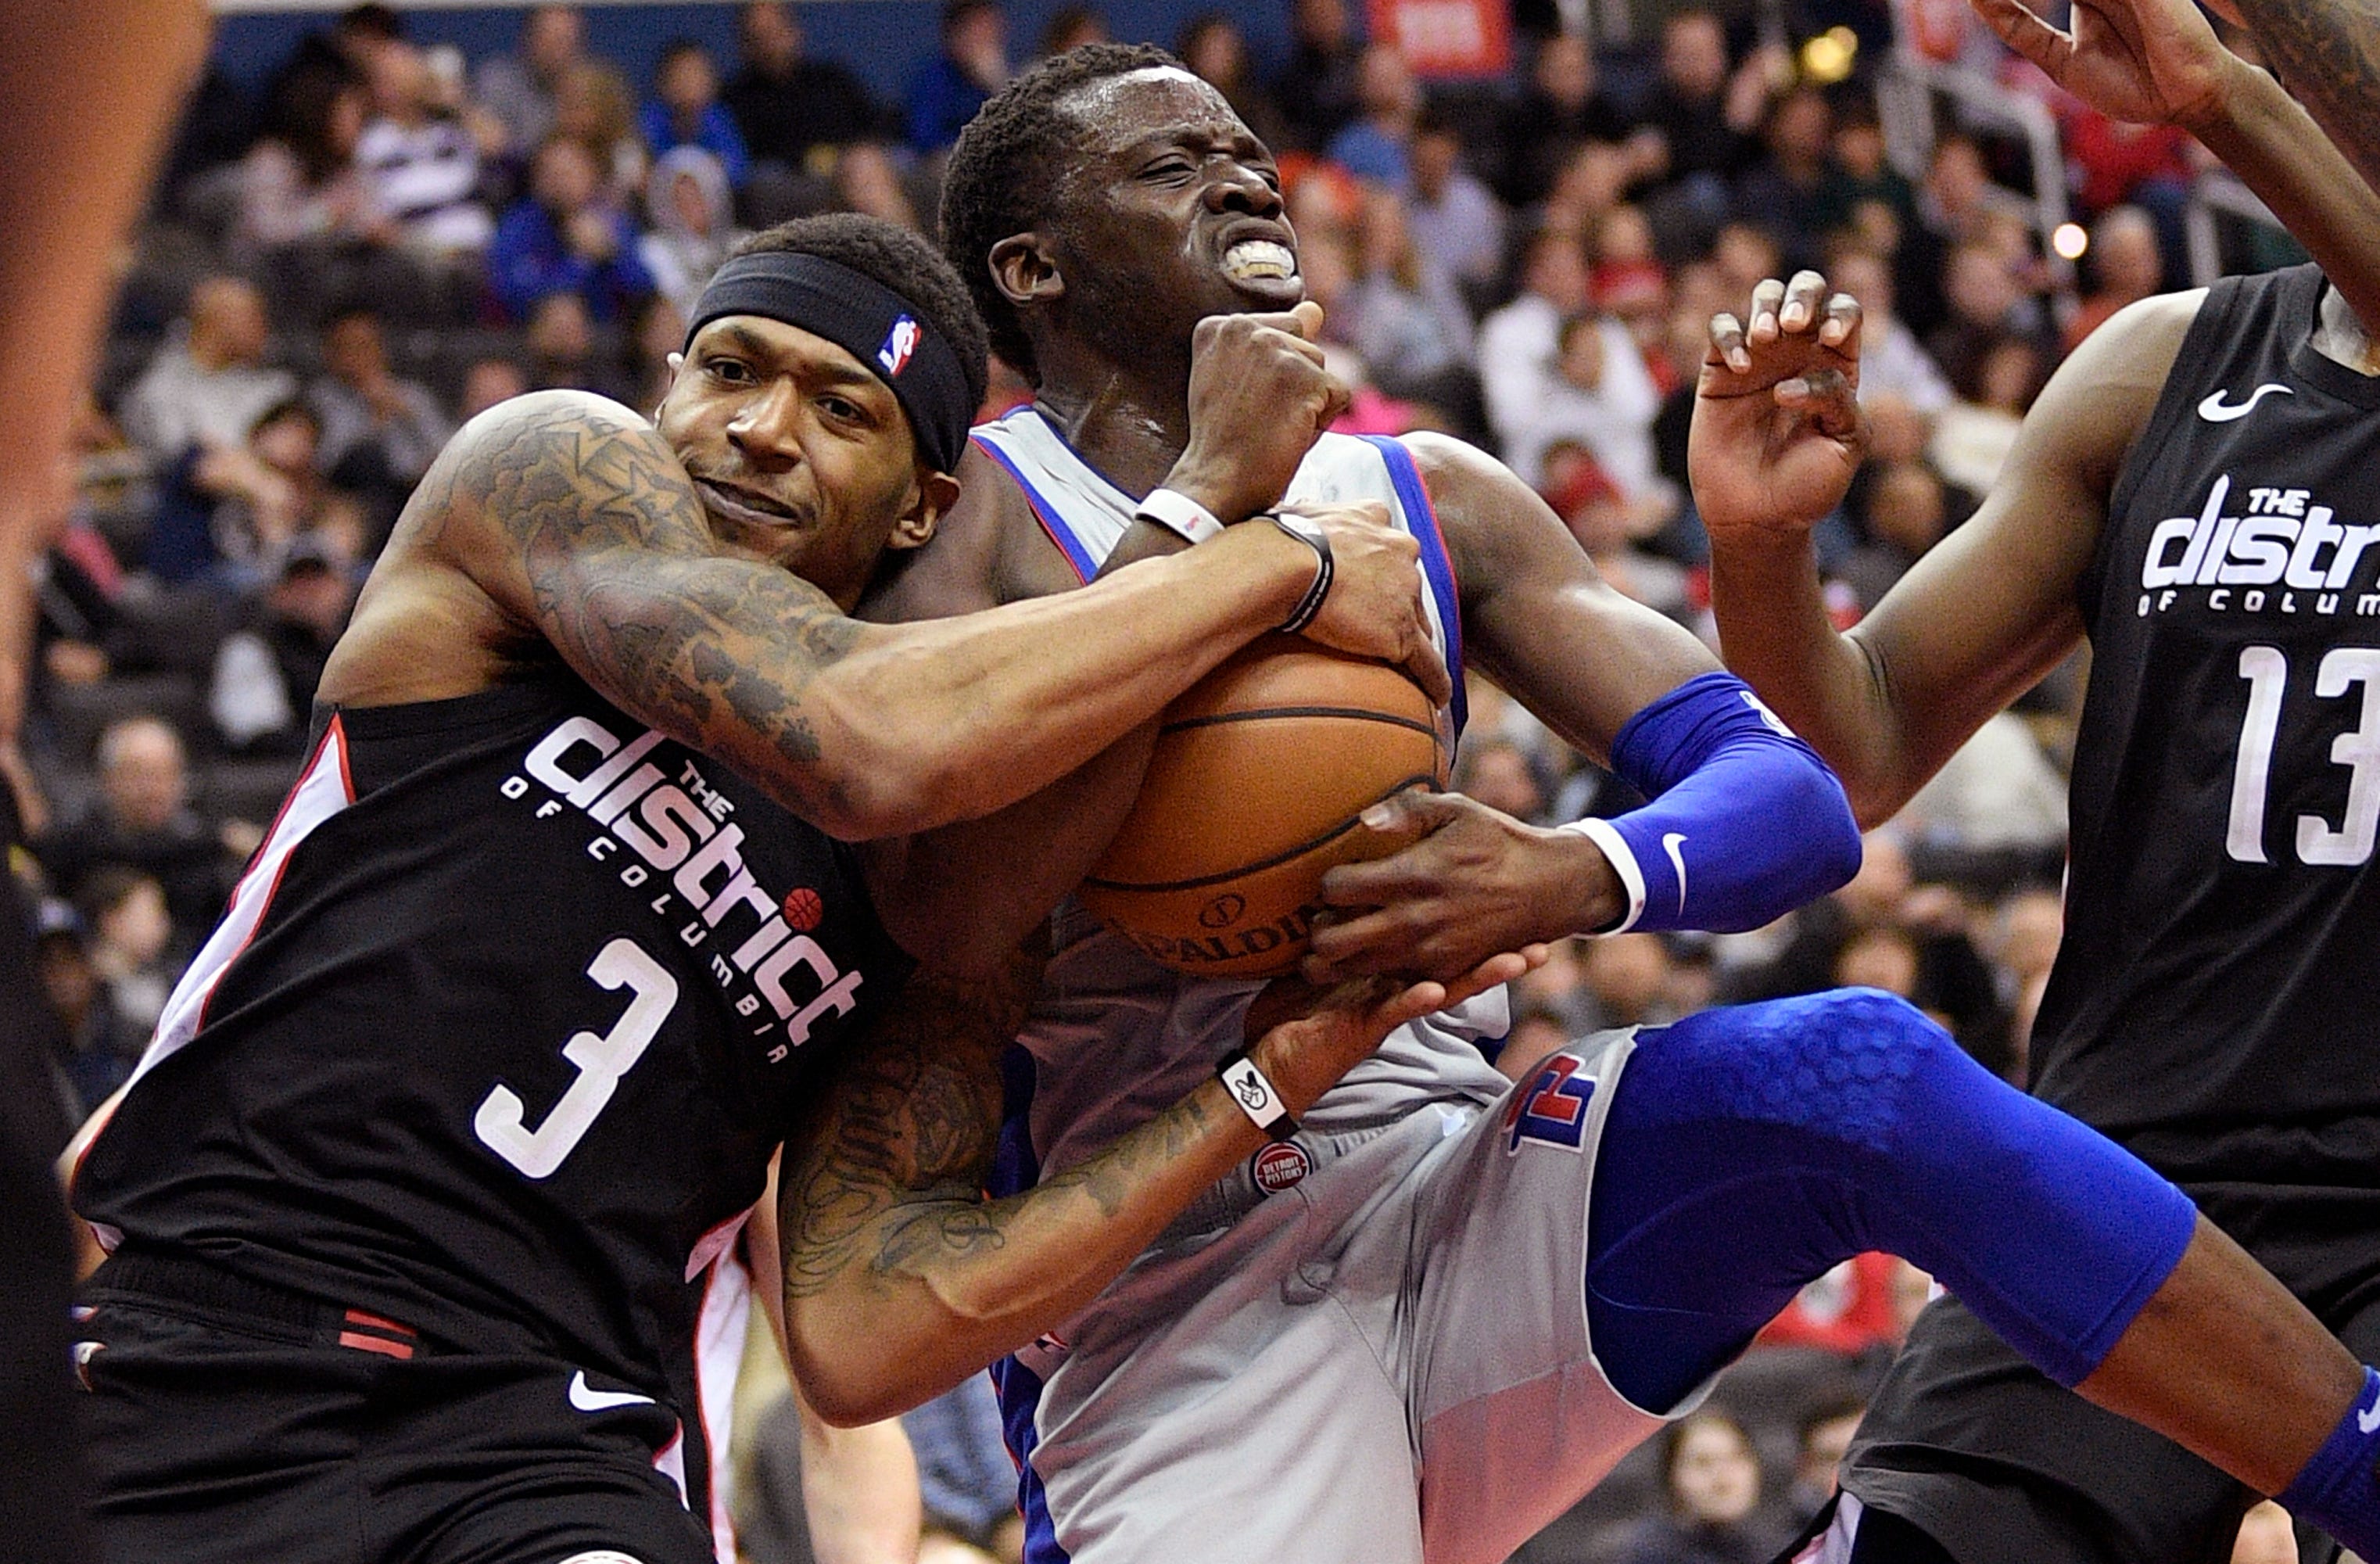 Wizards guard Bradley Beal (3) battles for the ball against Pistons guard Reggie Jackson during the first half.